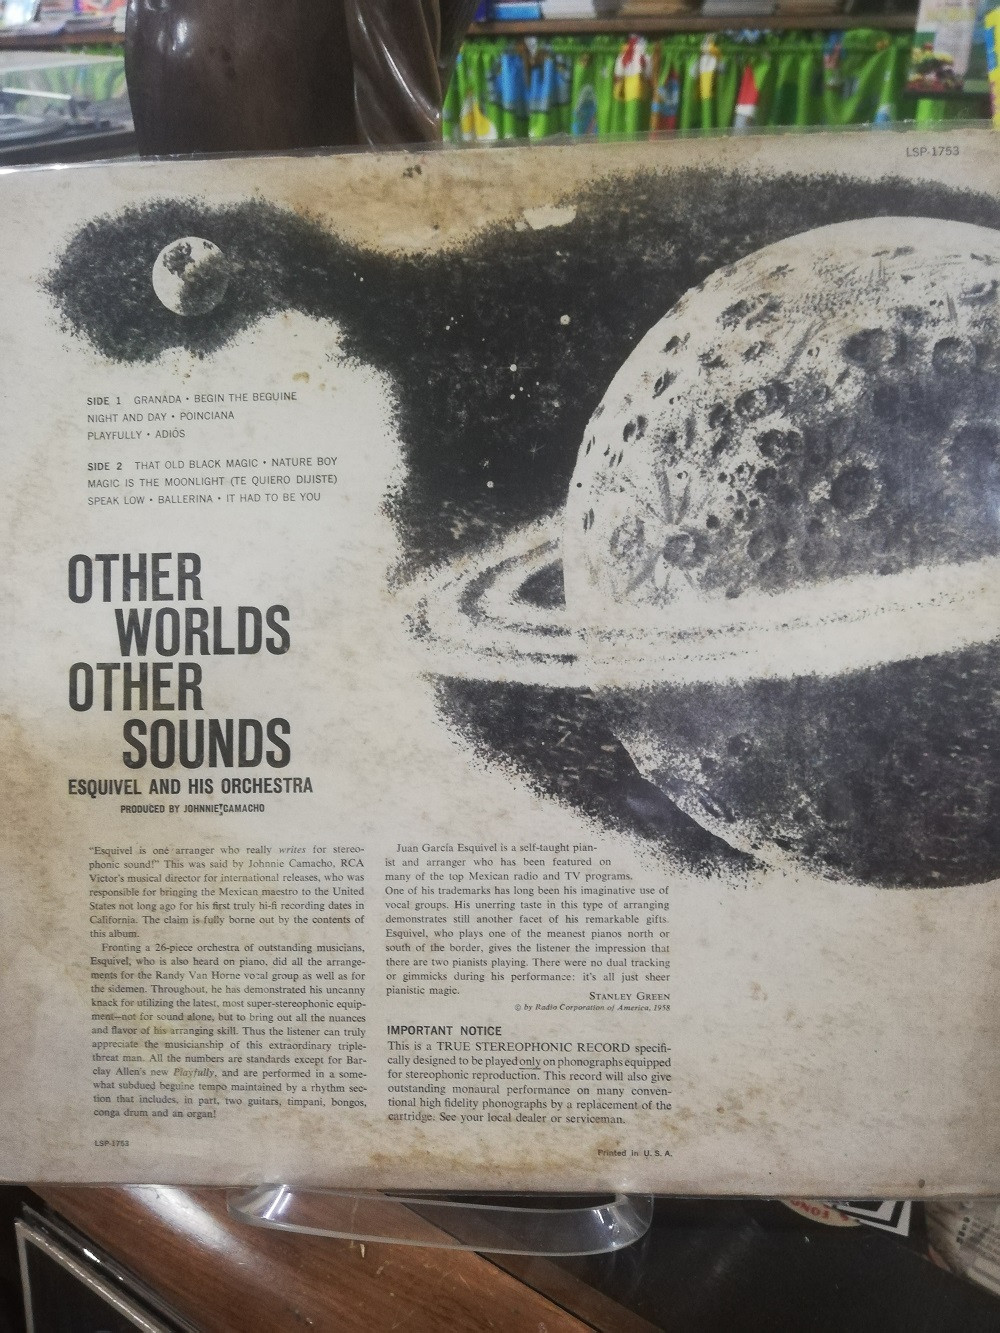 Imagen LP ESQUIVEL AND HIS ORCHESTRA - OTHER WORLDS OTHERS SOUNDS 2